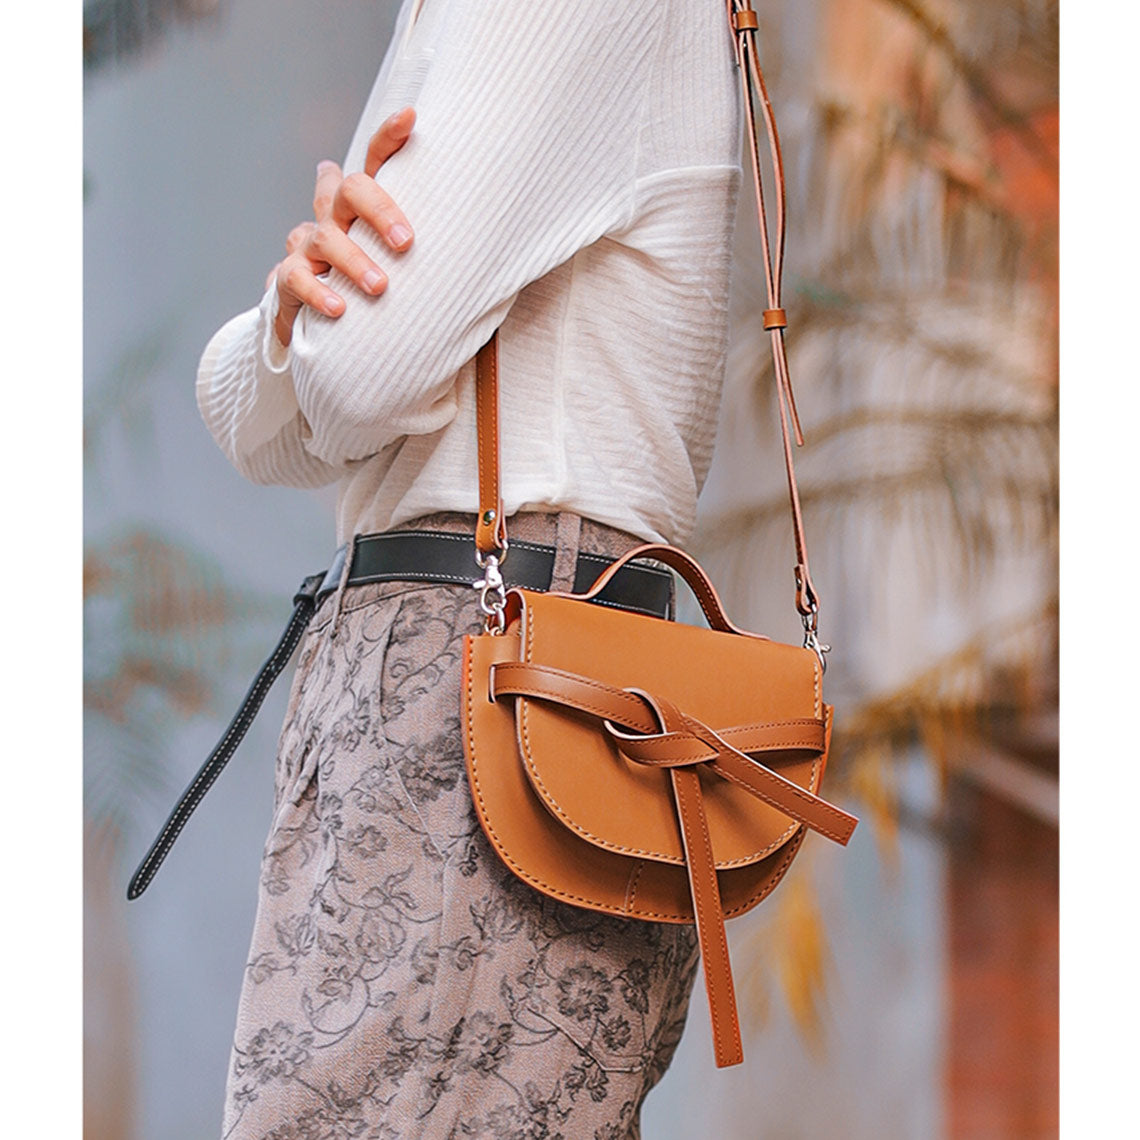 brown leather saddle bag  wearing by a young lady   | POPSEWING